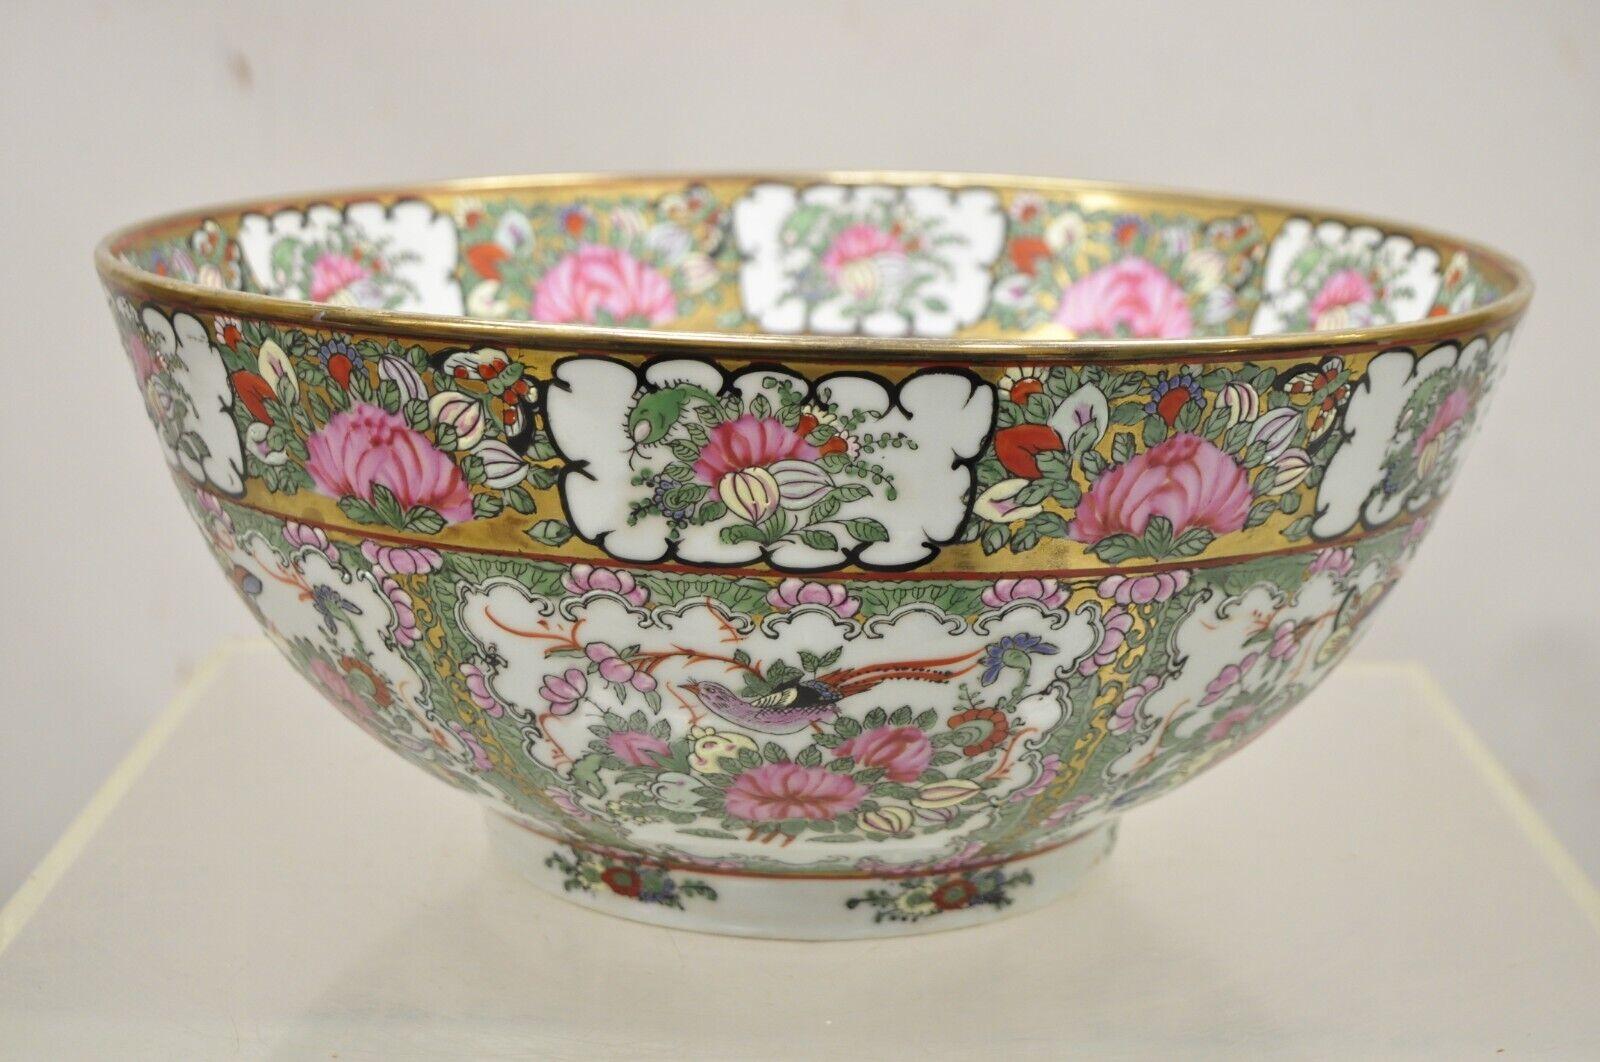 Large Chinese Export rose Medallion Porcelain hand painted decorative punch bowl, circa Early to Mid-20th Century. Measurements: 6.5